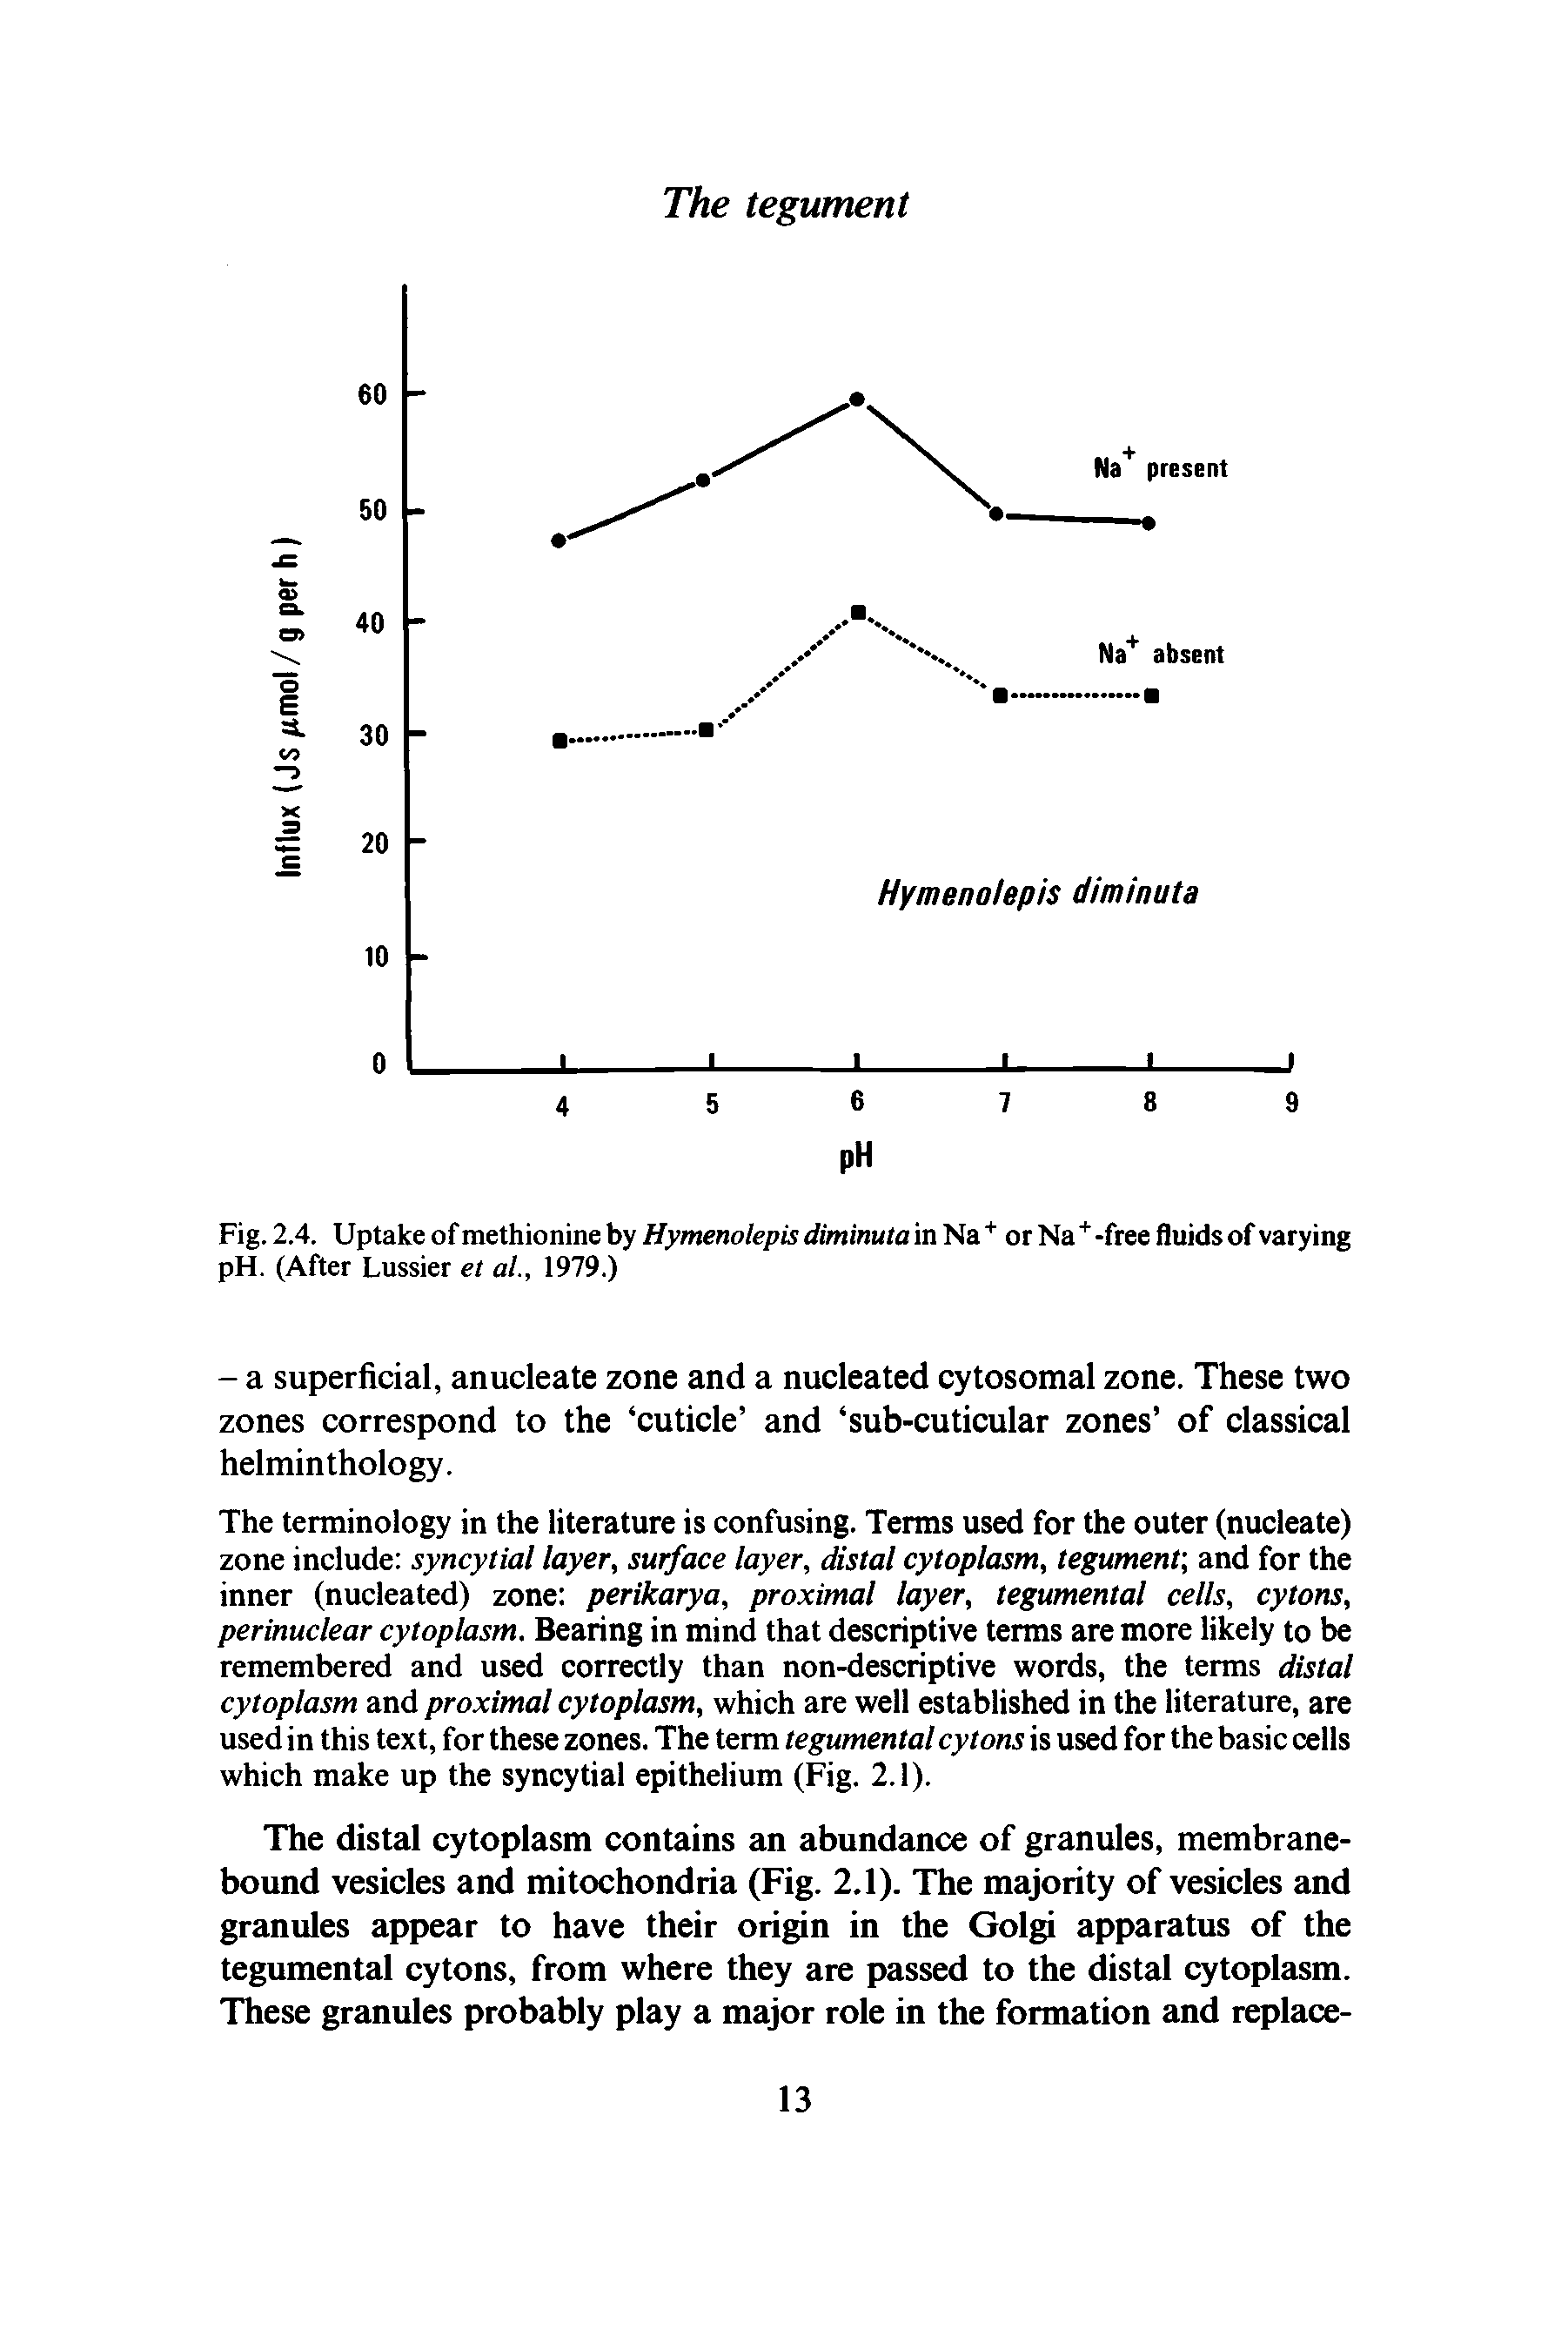 Fig. 2.4. Uptake of methionine by Hymenolepis diminuta in Na + or Na+-free fluids of varying pH. (After Lussier et at, 1979.)...